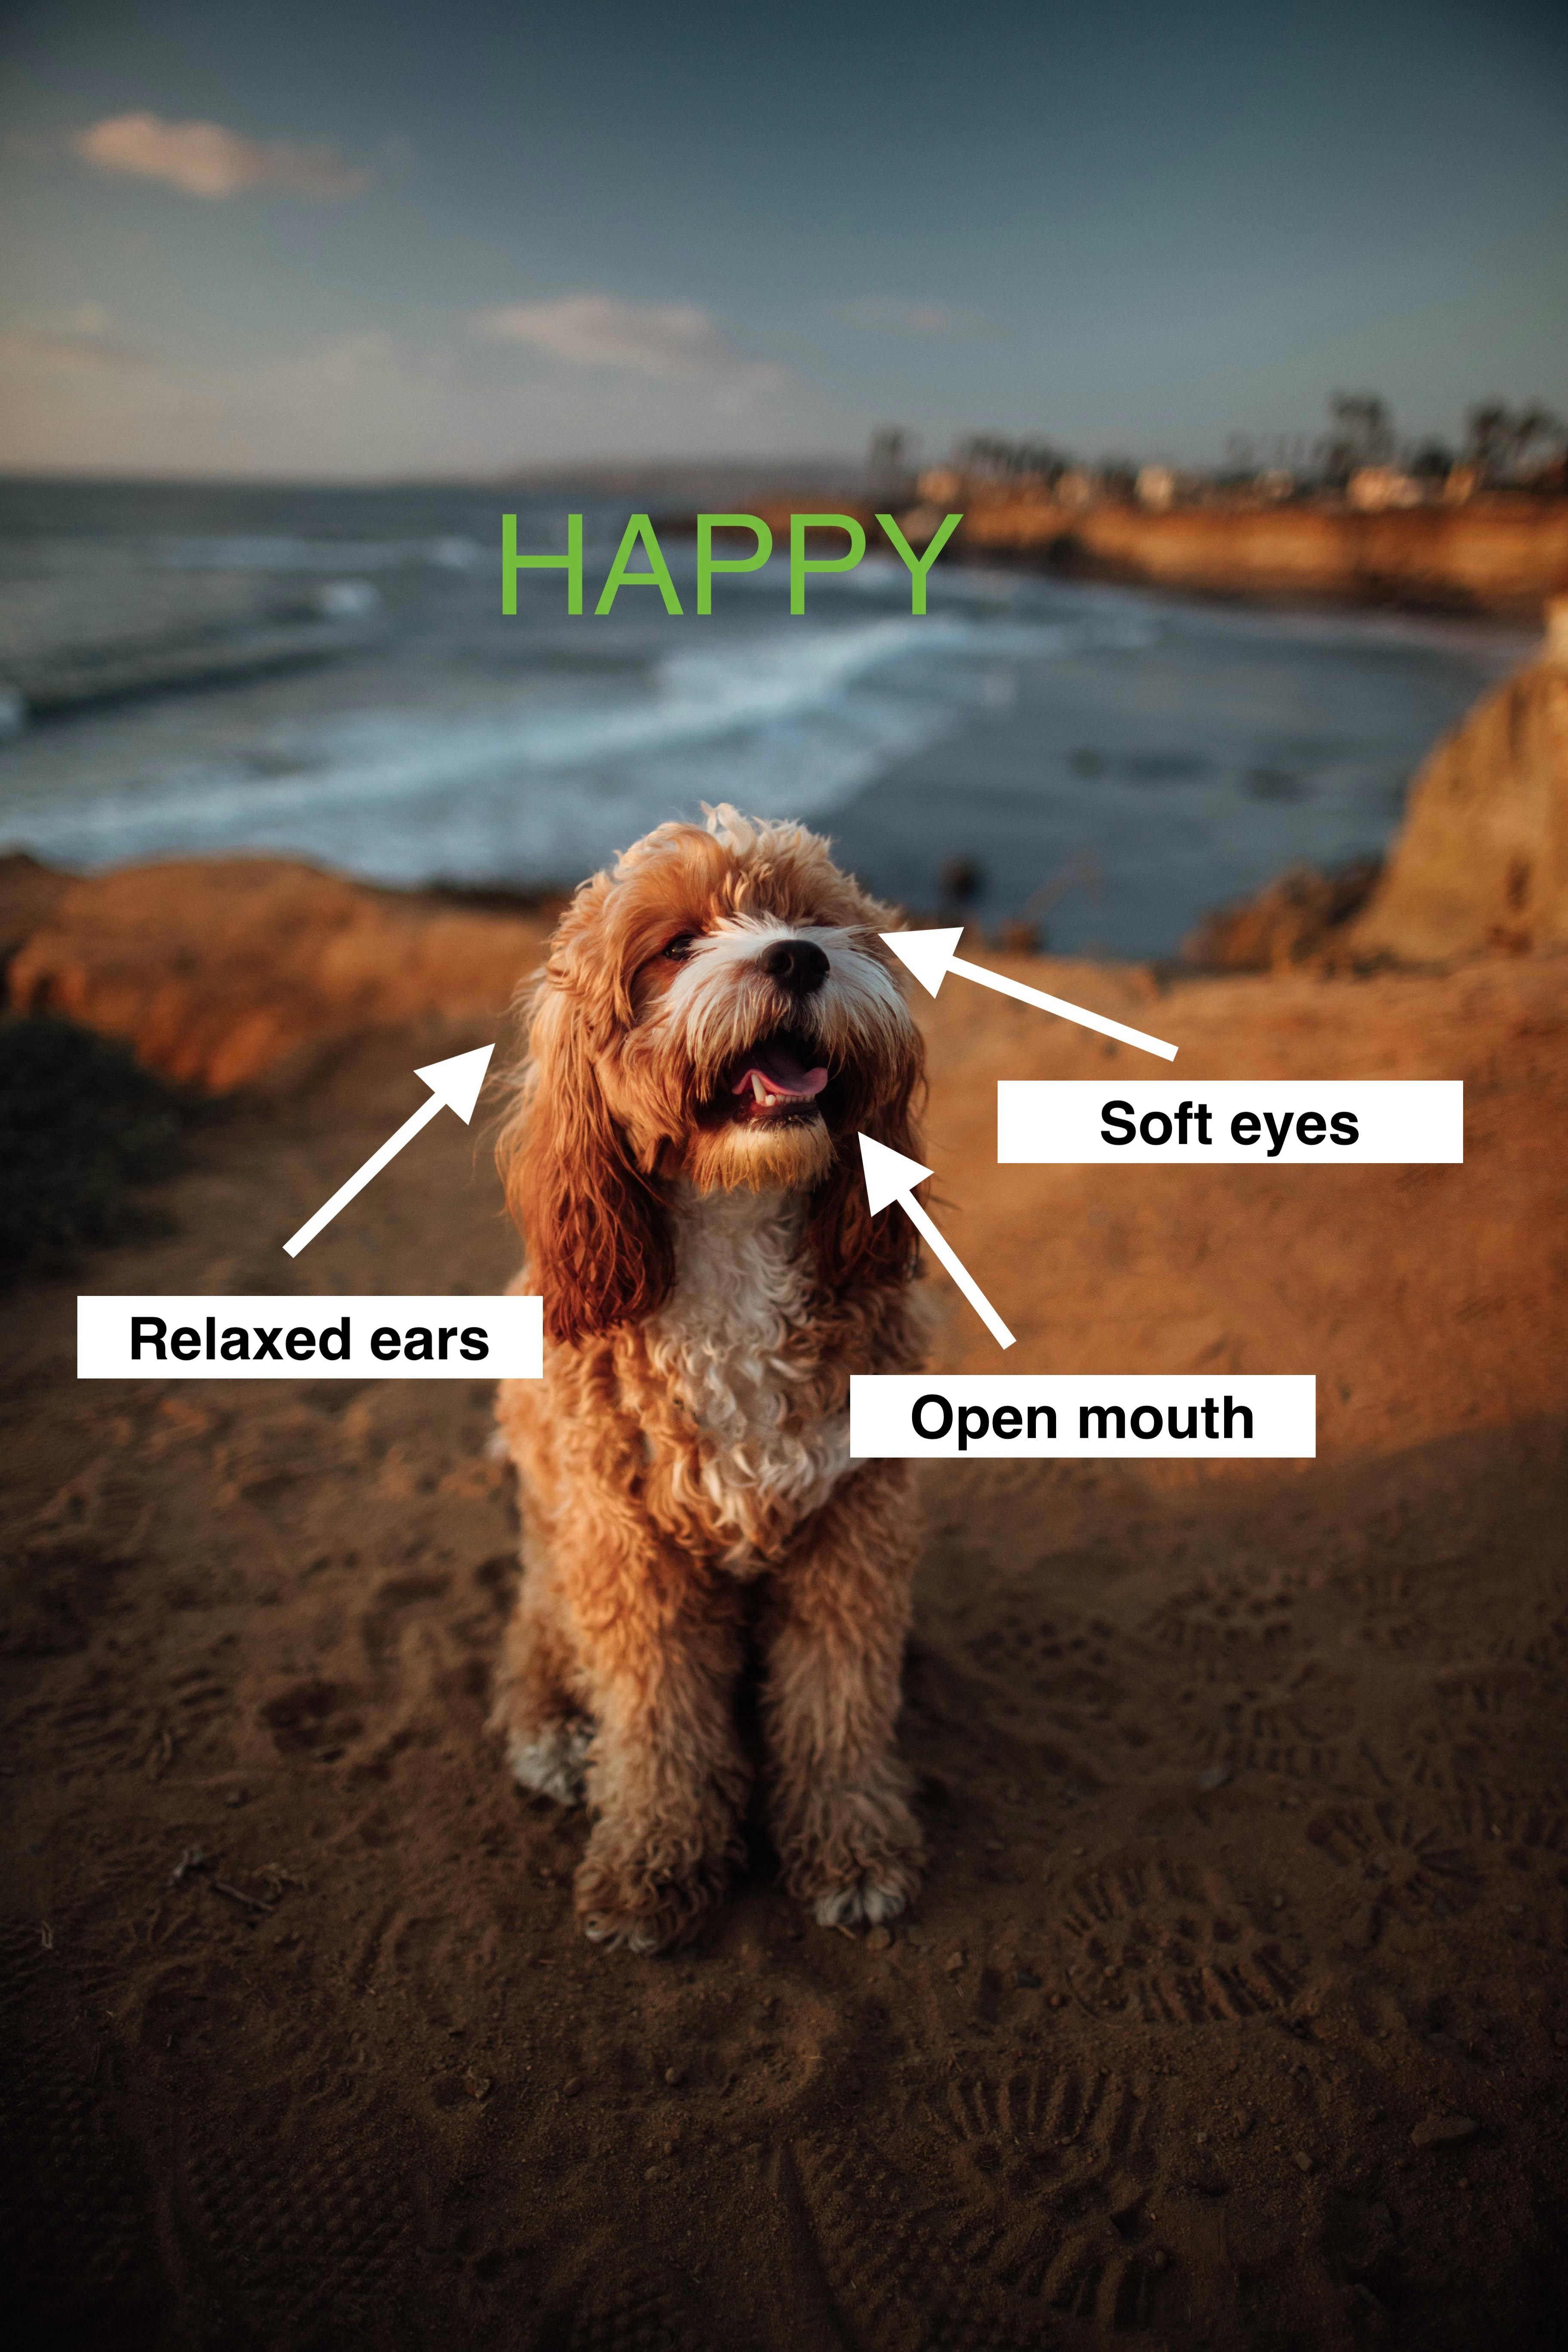 Words overlay an image of a dog on a beach, showing happy body language